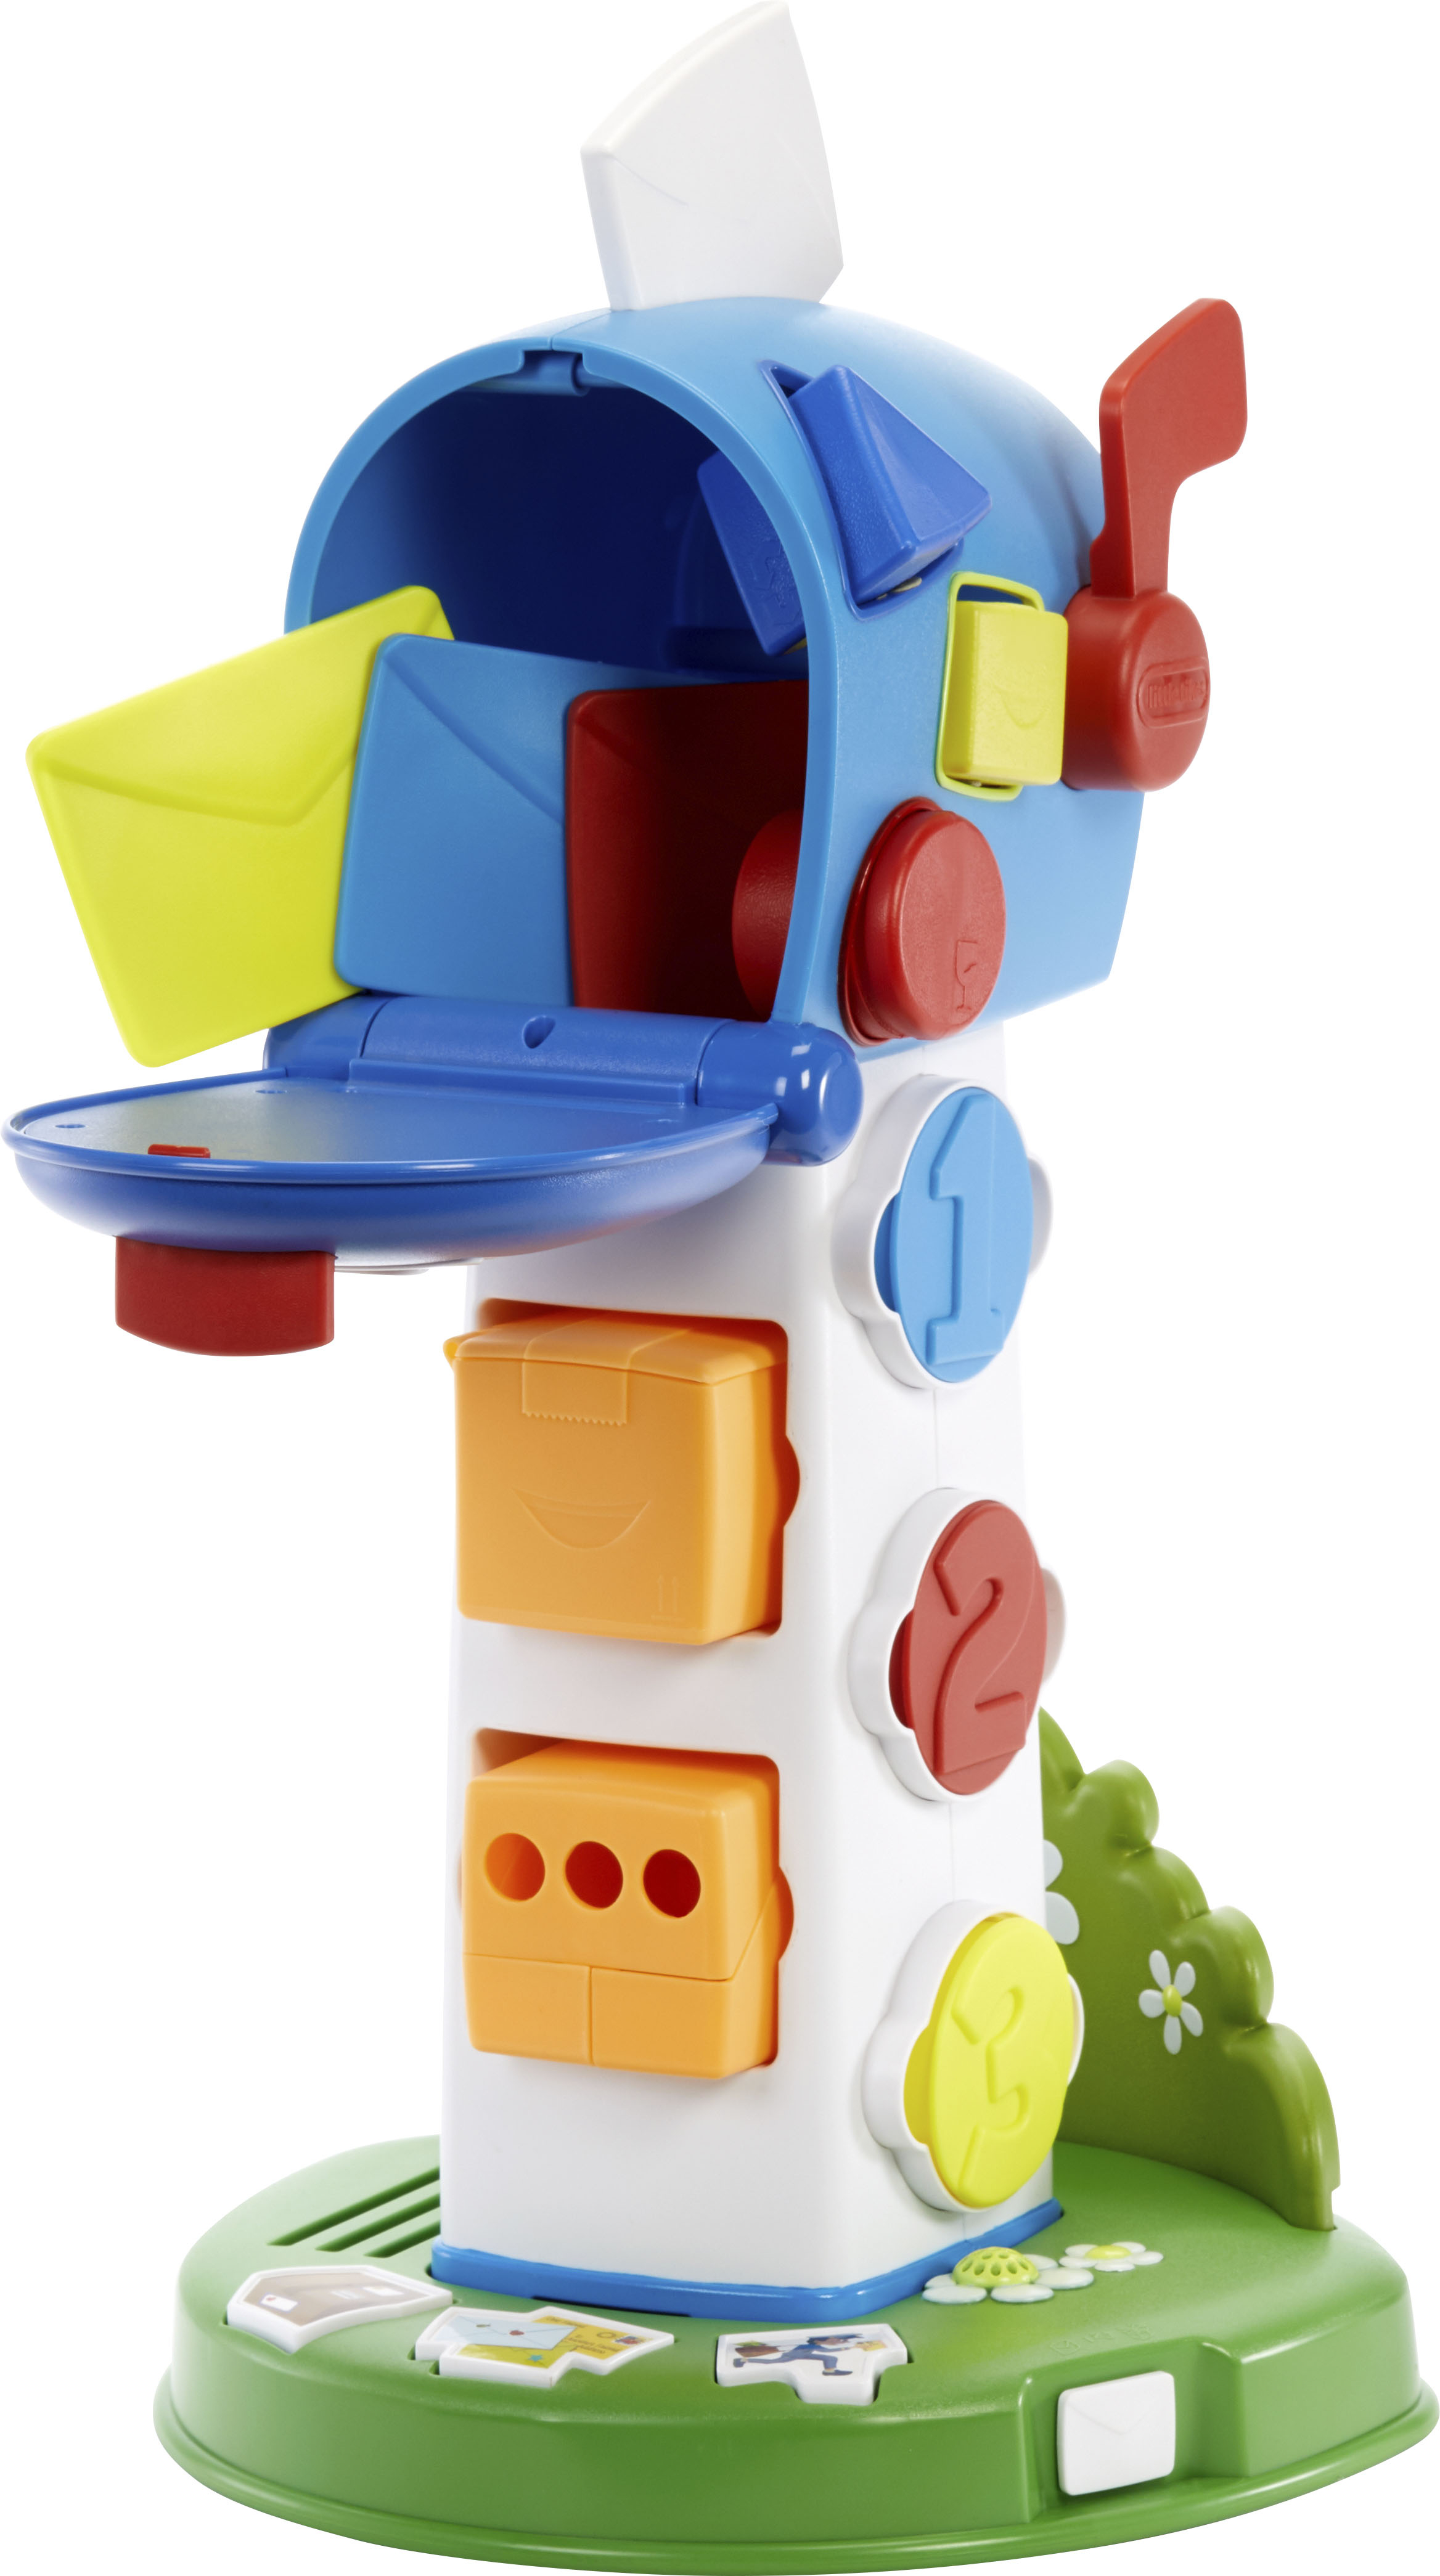 Angle View: Little Tikes Learn & Play My First Mailbox, Pretend Mailbox Playset for Learning Shapes, Numbers, and Colors - for Ages 1 -3 Years